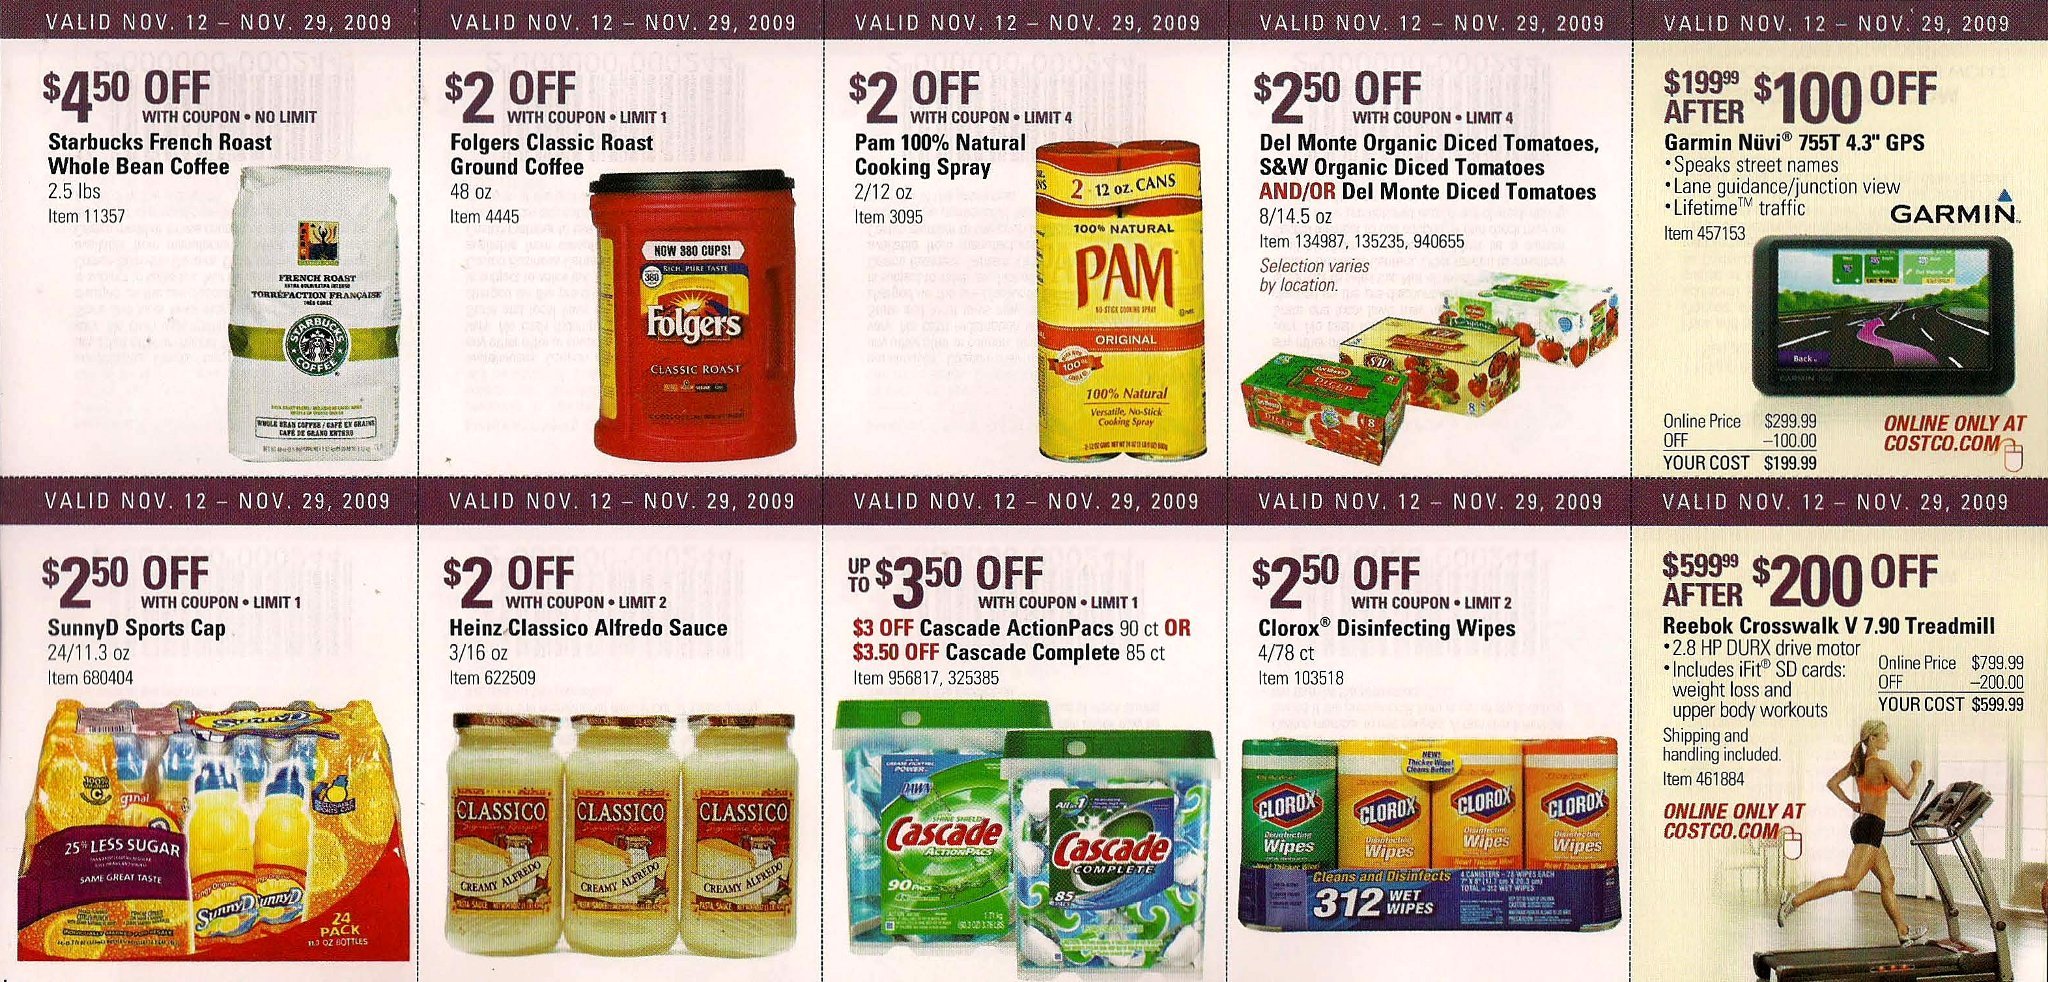 Coupon book page 3 in full-size.